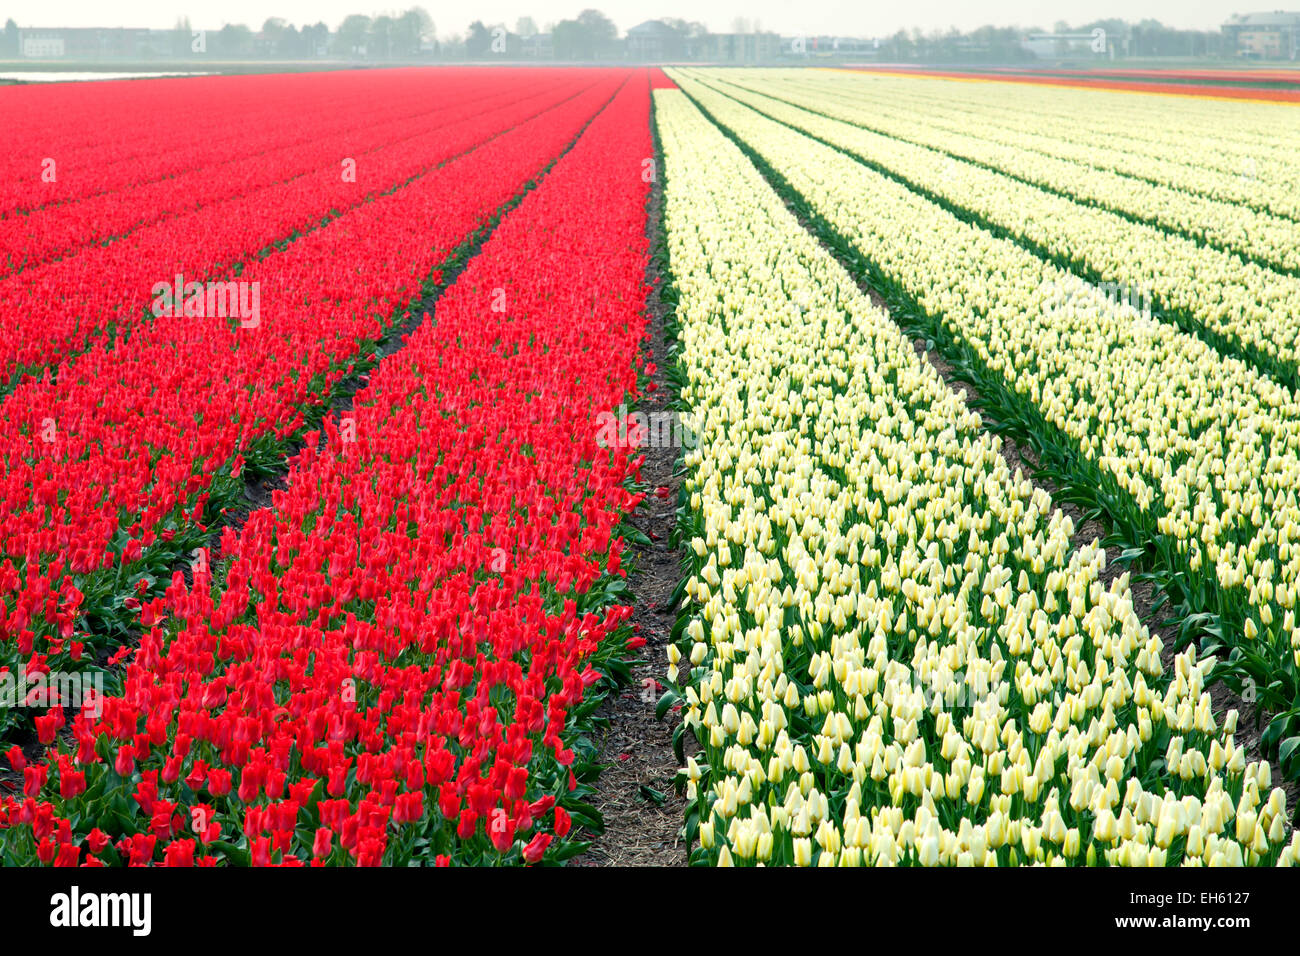 Commercial tulip field near Lisse, Netherlands Stock Photo